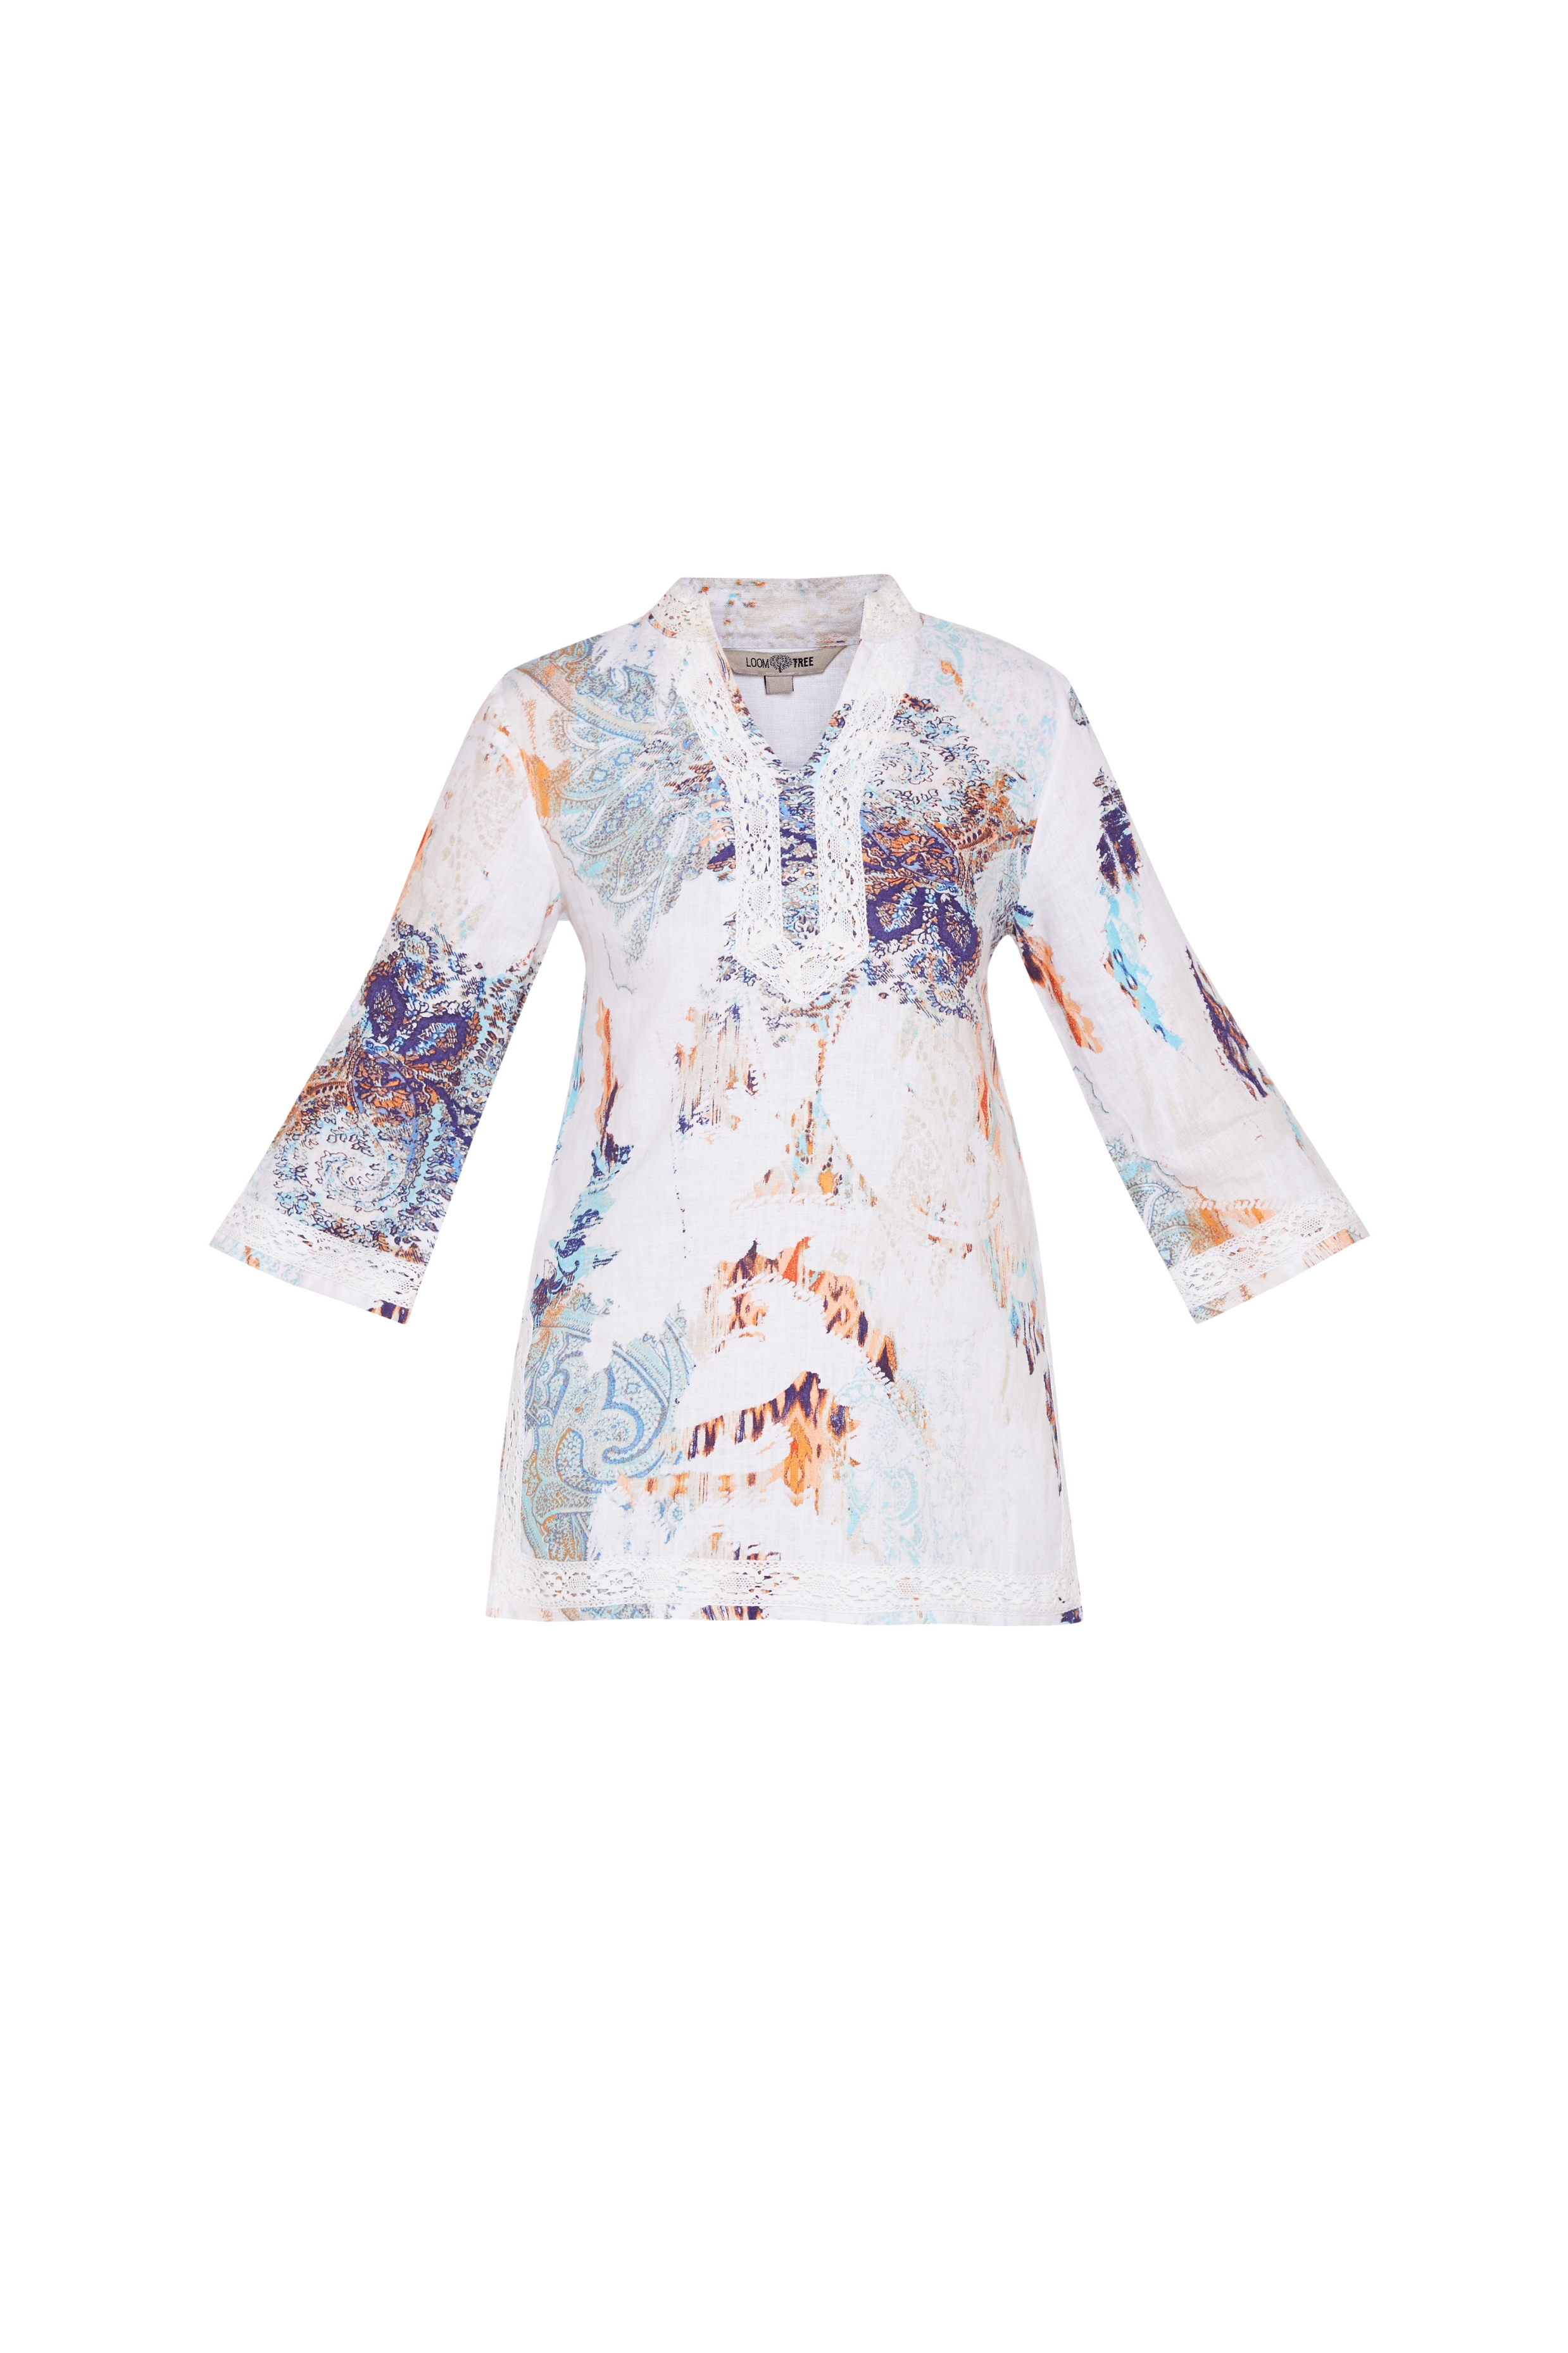 Loom Tree_Lace Trim Printed Linen  Tunic_MRP Rs. 1,999